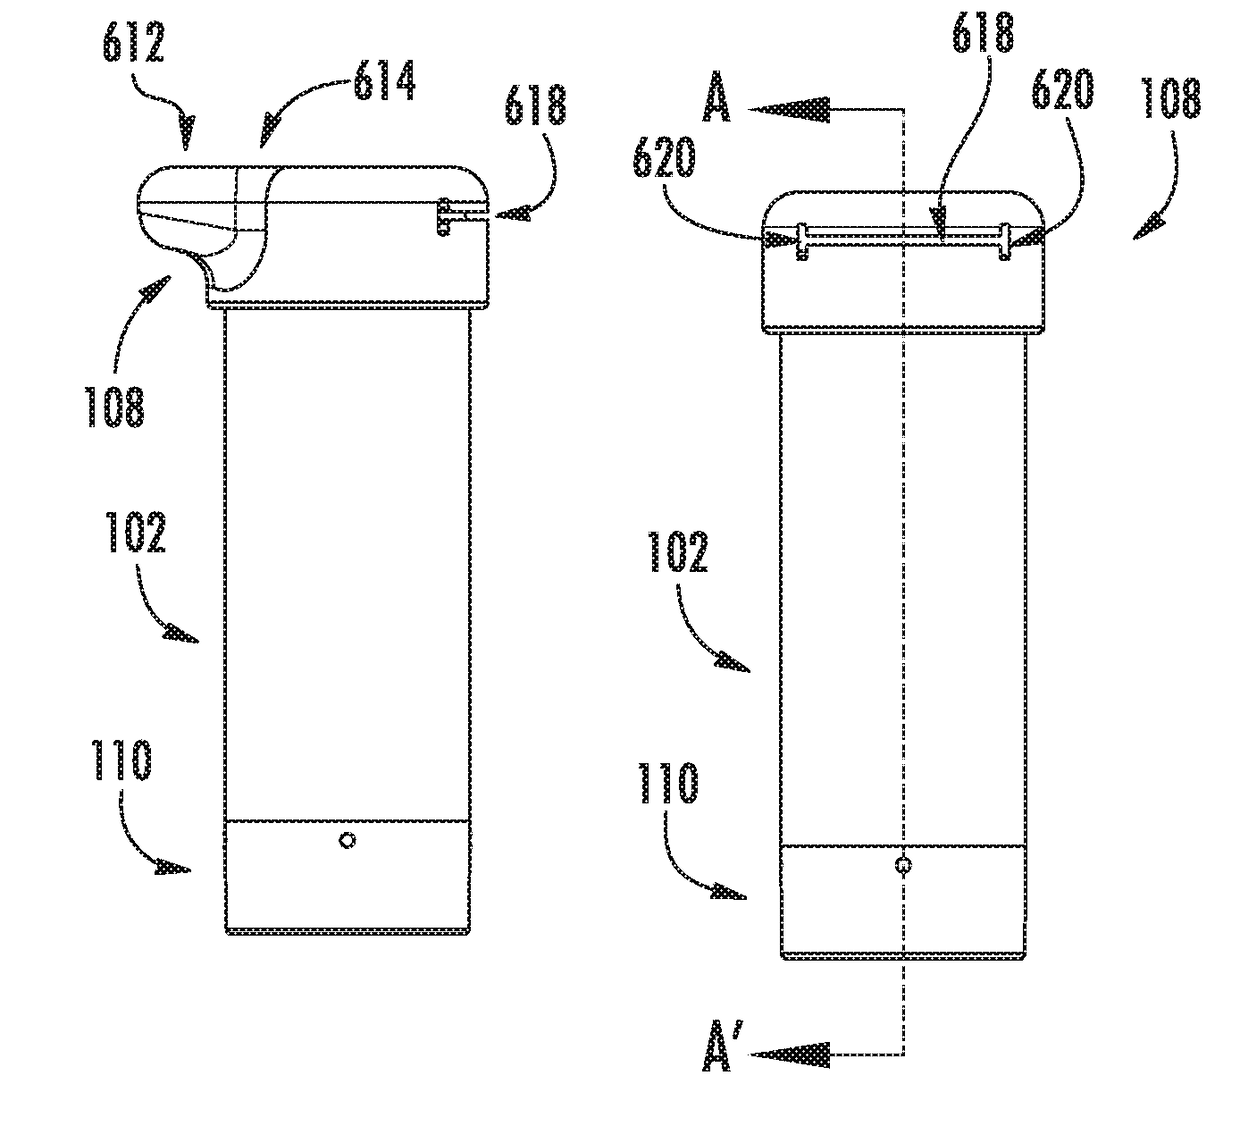 Device for Storing and Dispensing Food Items